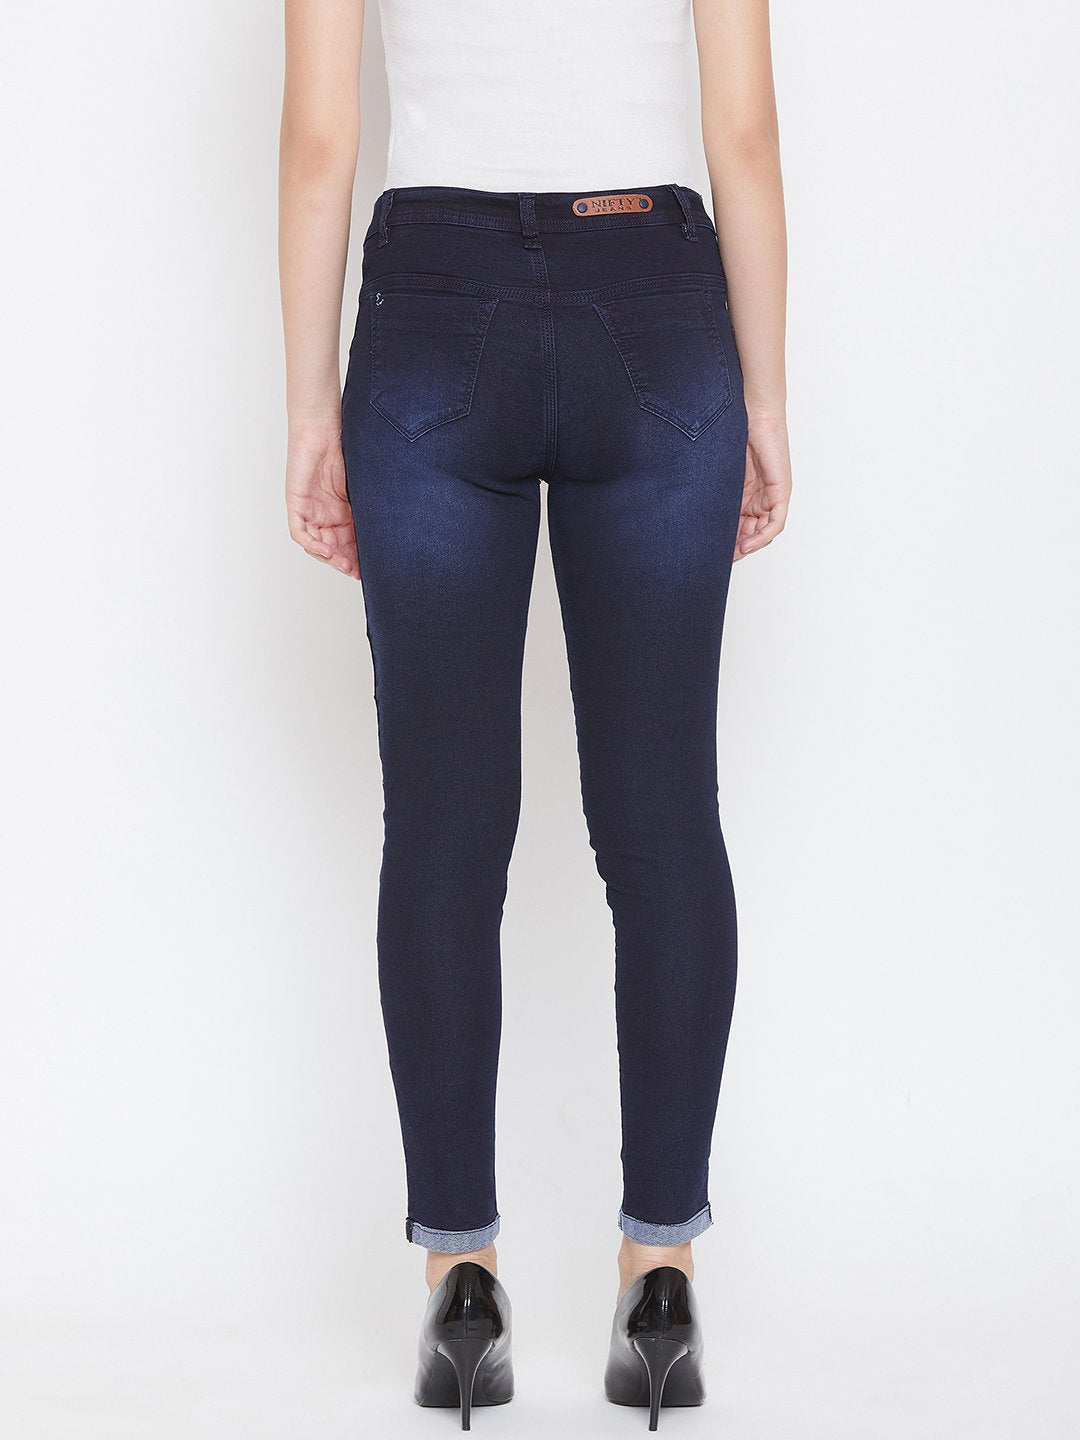 Distressed Stretchable Blue Jeans - NiftyJeans